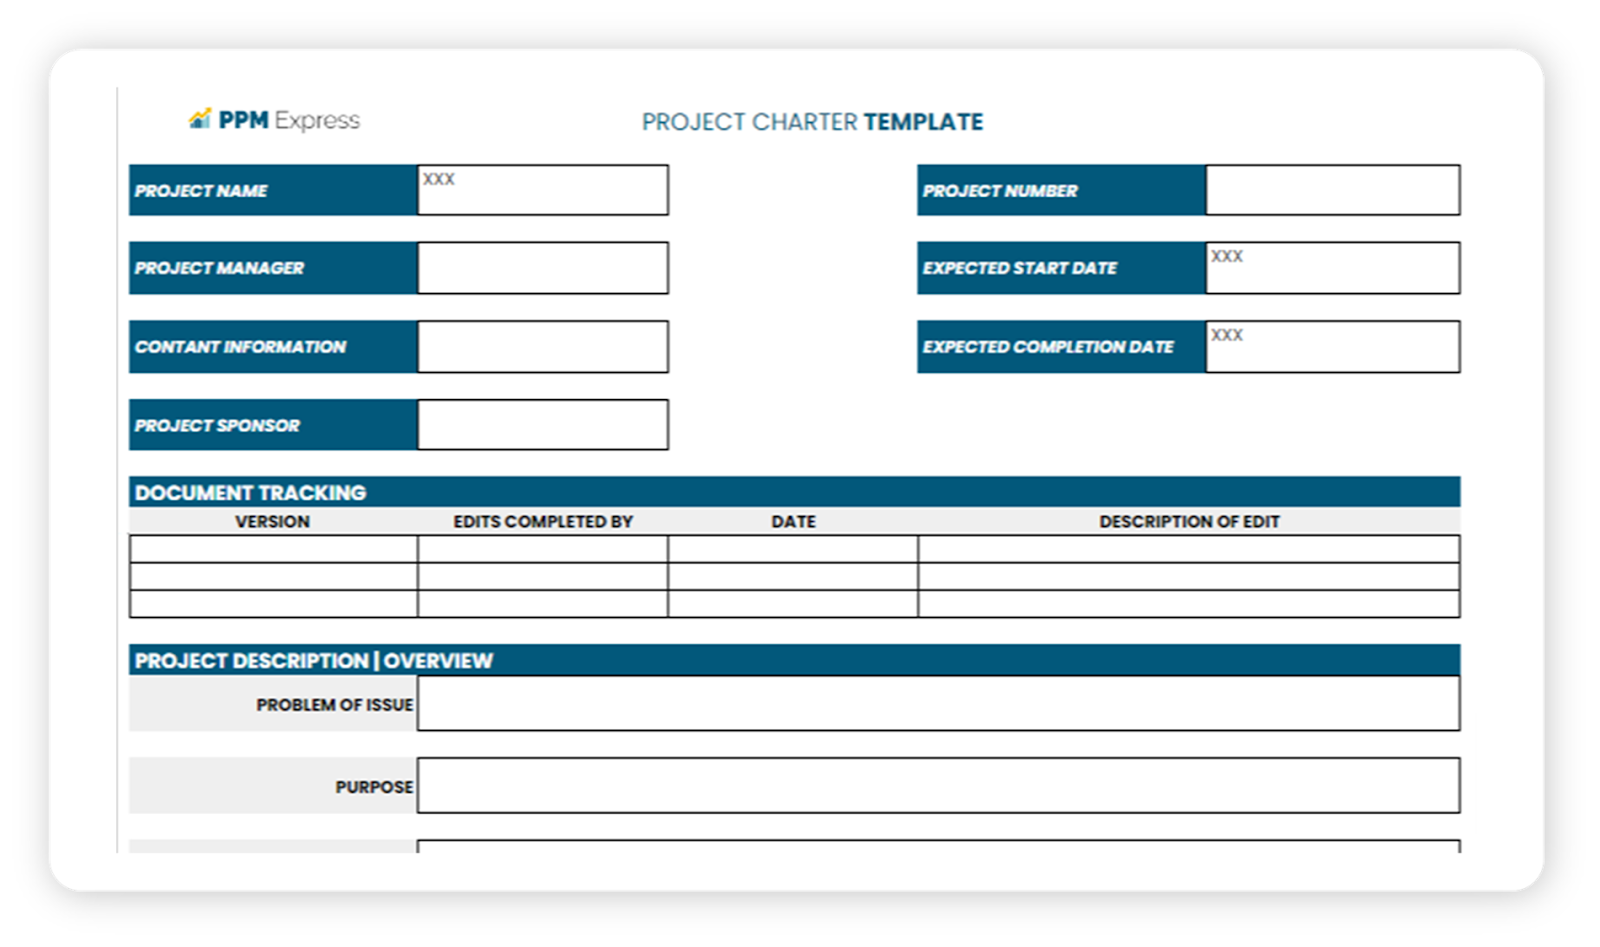 Project charter template download for free by PPM Express